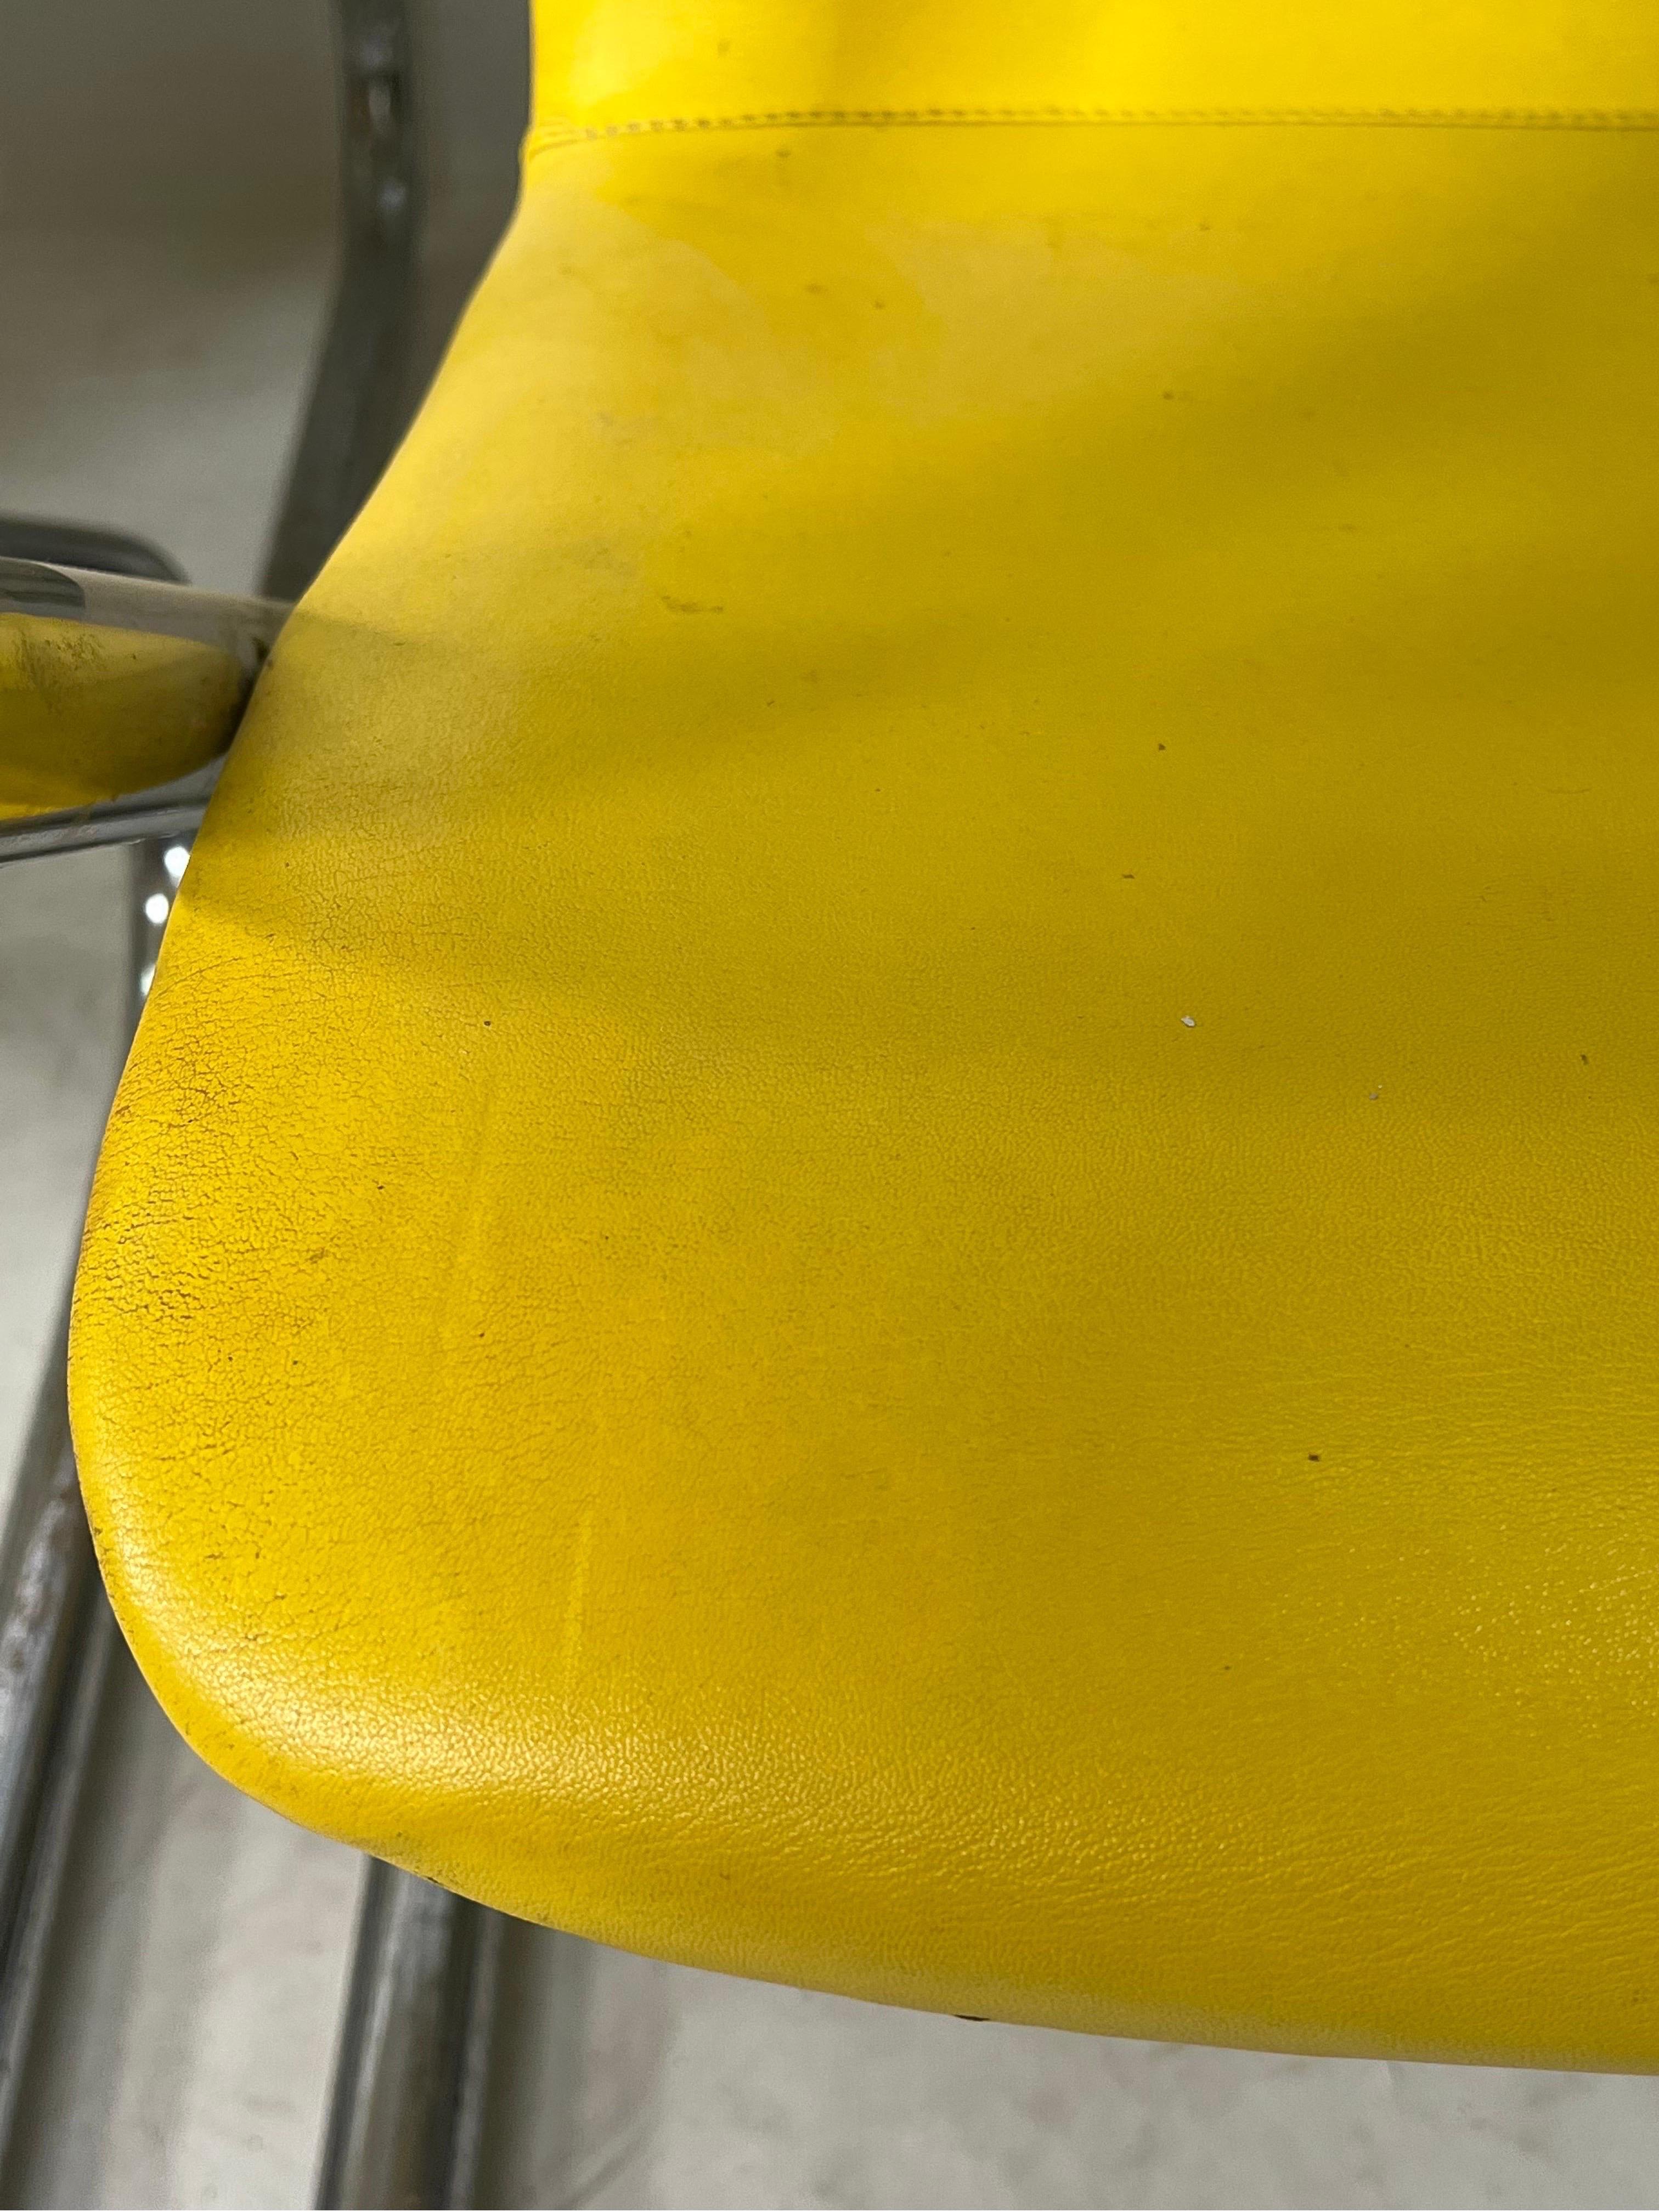 1970s Tubular Chrome Yellow Dining Chair 36 Available For Sale 3